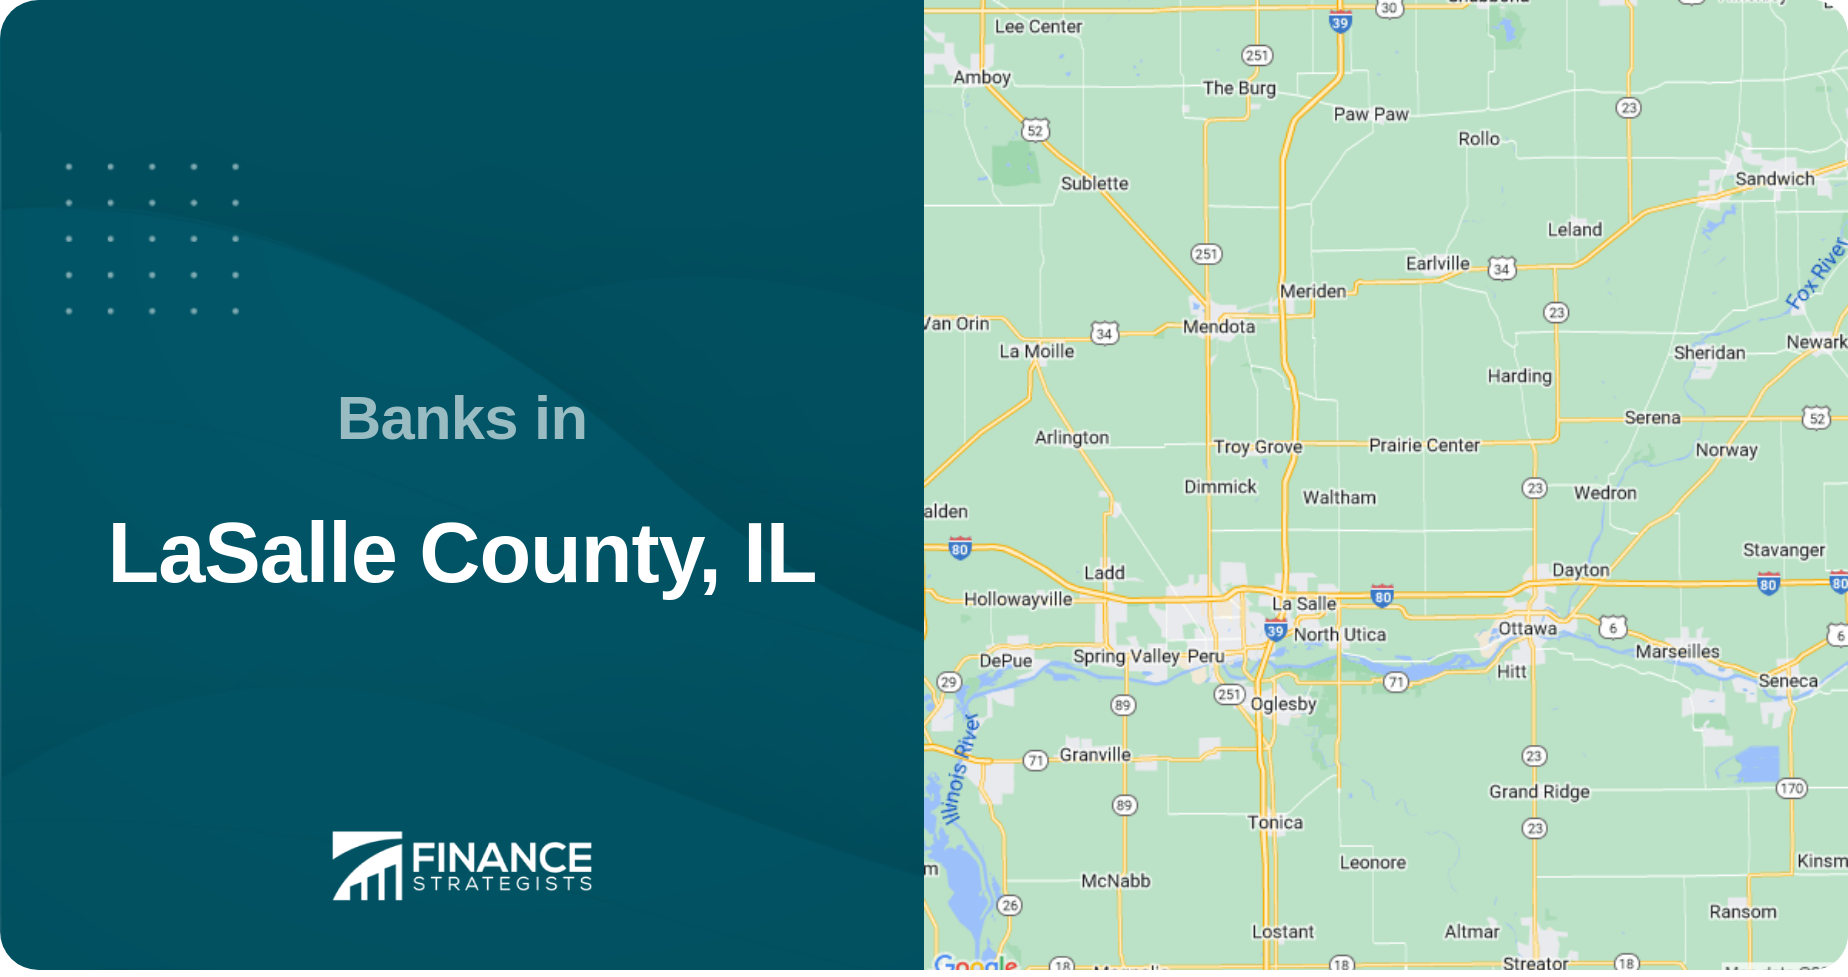 Banks in LaSalle County, IL